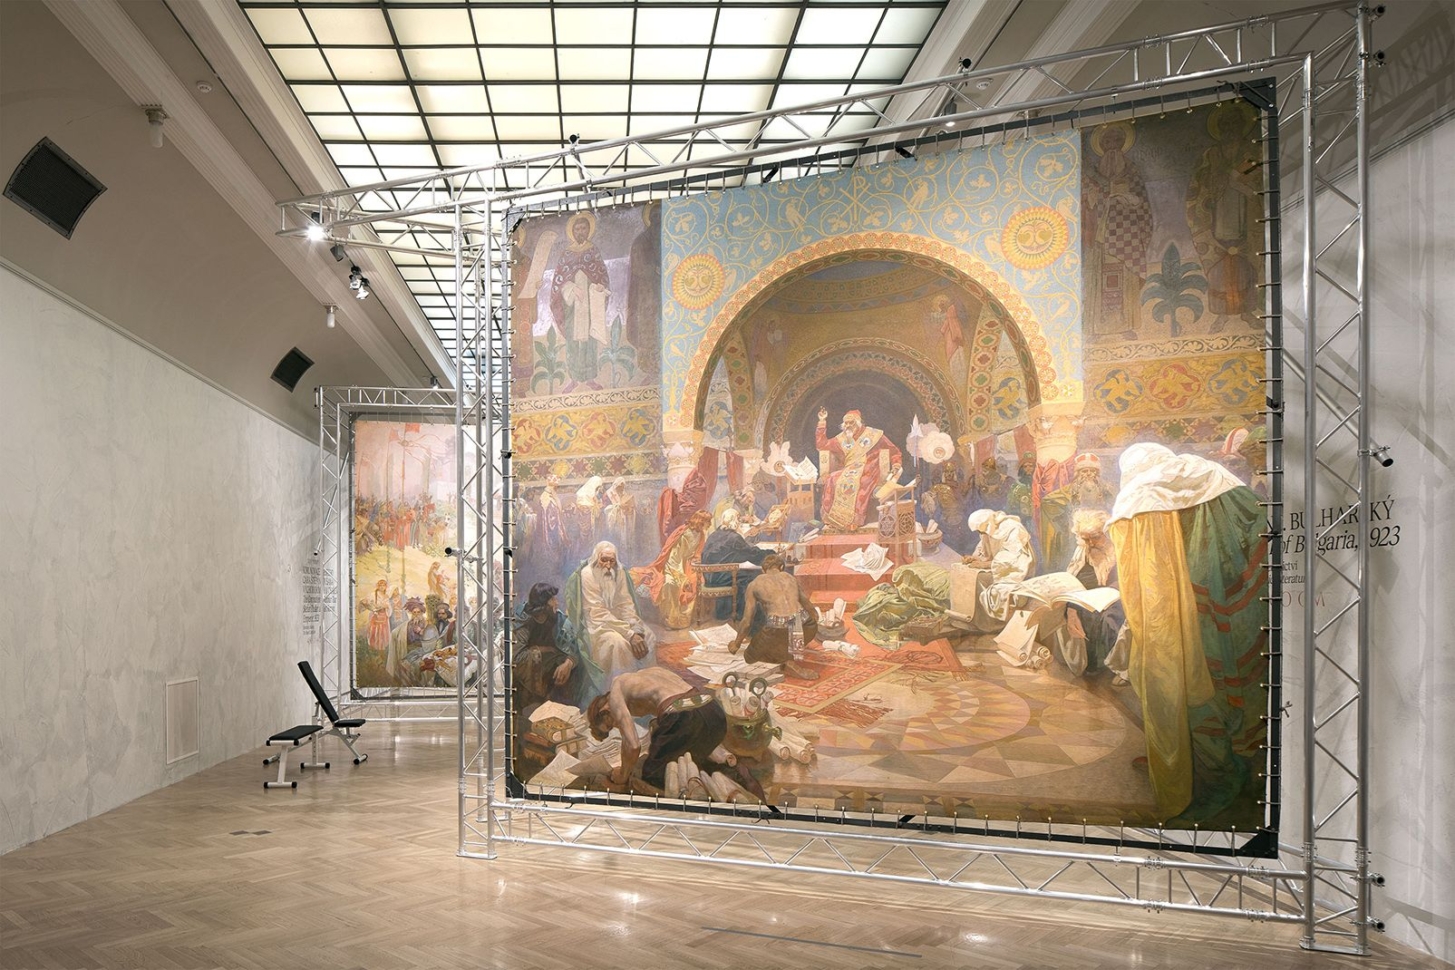 view to the exhibition of Alfons Mucha: The Slav epic, The Municipal House, 2018. Photo by Tomáš Souček